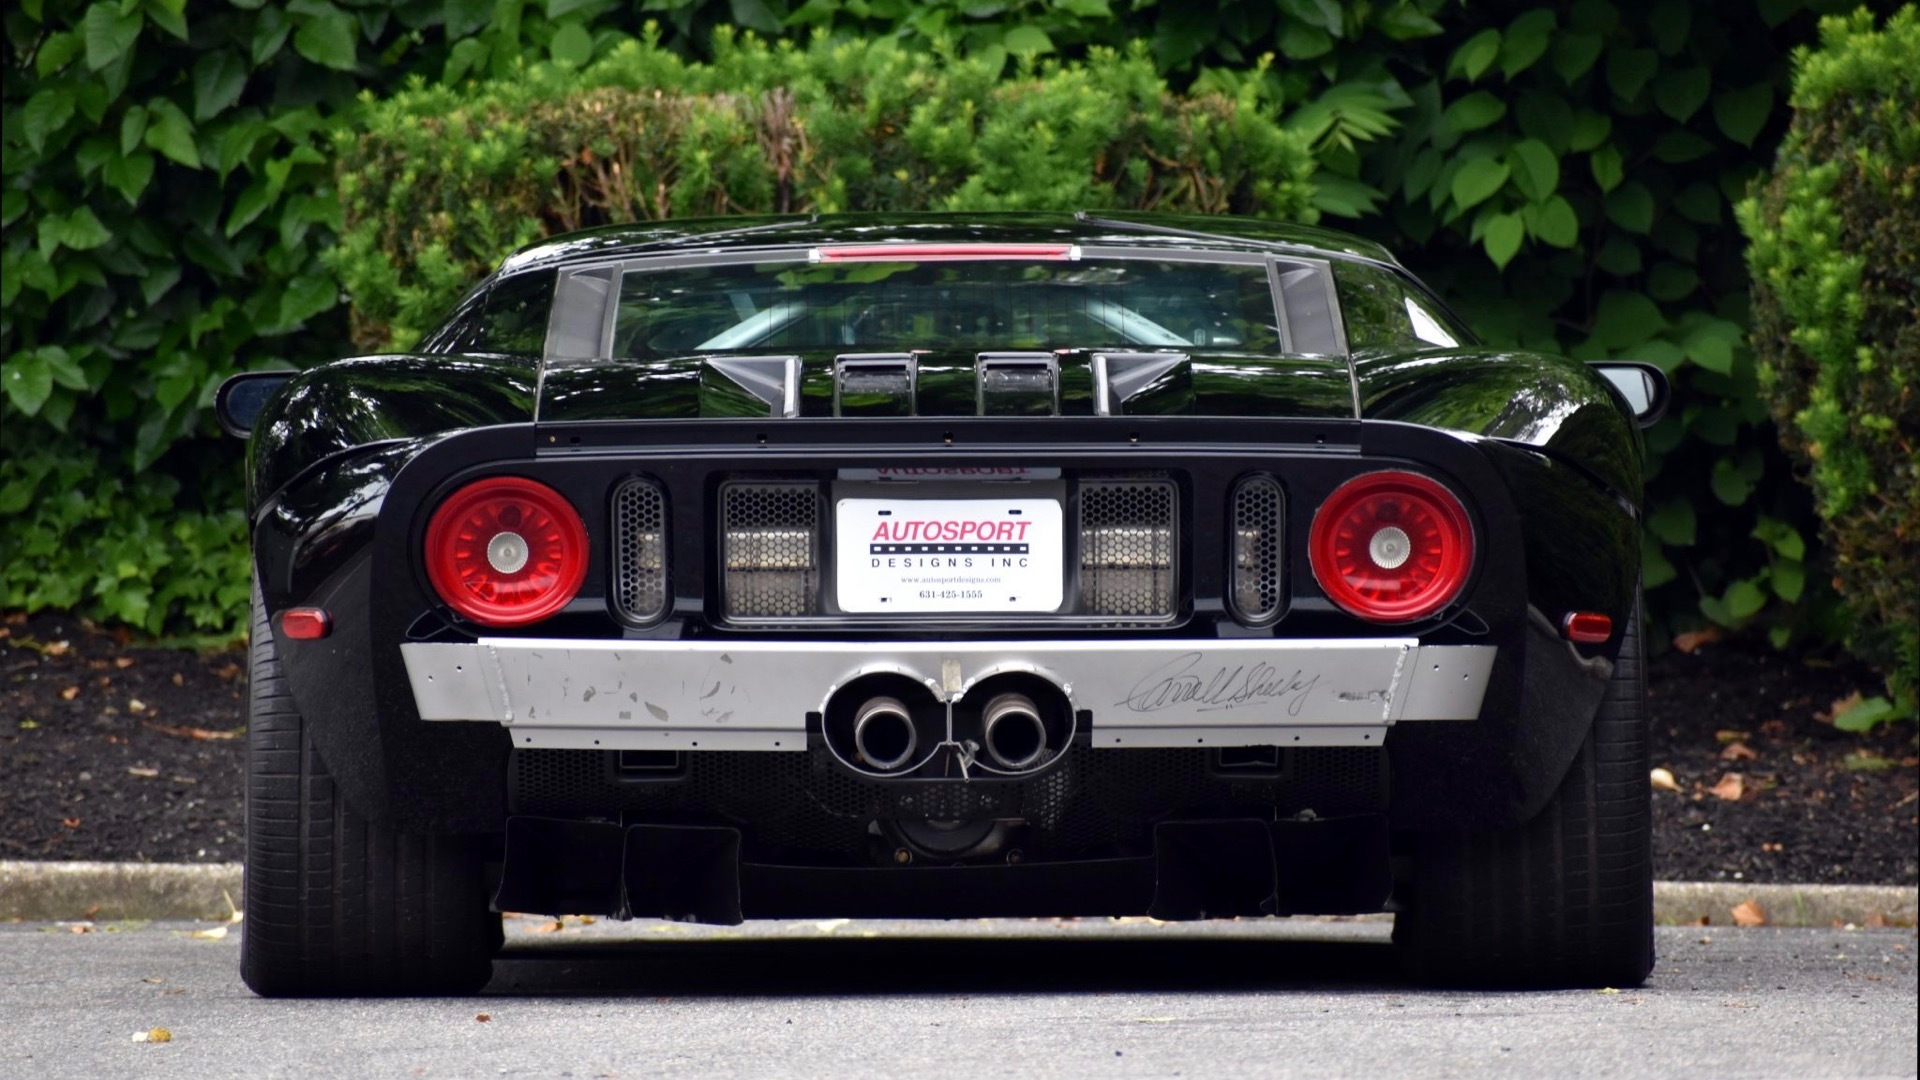 2004 Ford GT Confirmation Prototype 1 (Photo by Bring a Trailer)